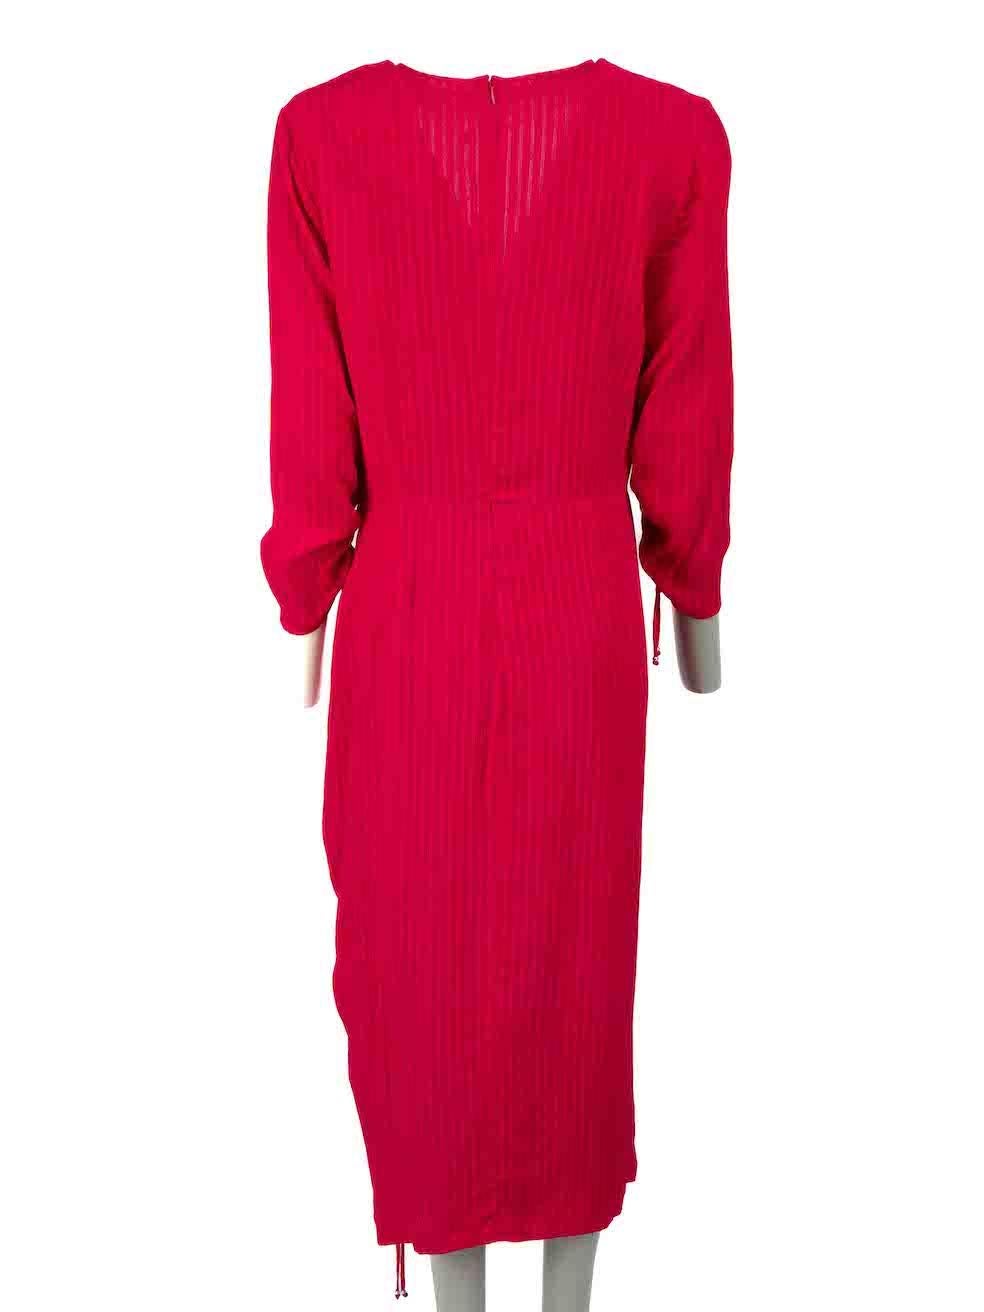 Altuzarra Hot Pink Ruched Asymmetric Hem Dress Size XL In Excellent Condition For Sale In London, GB